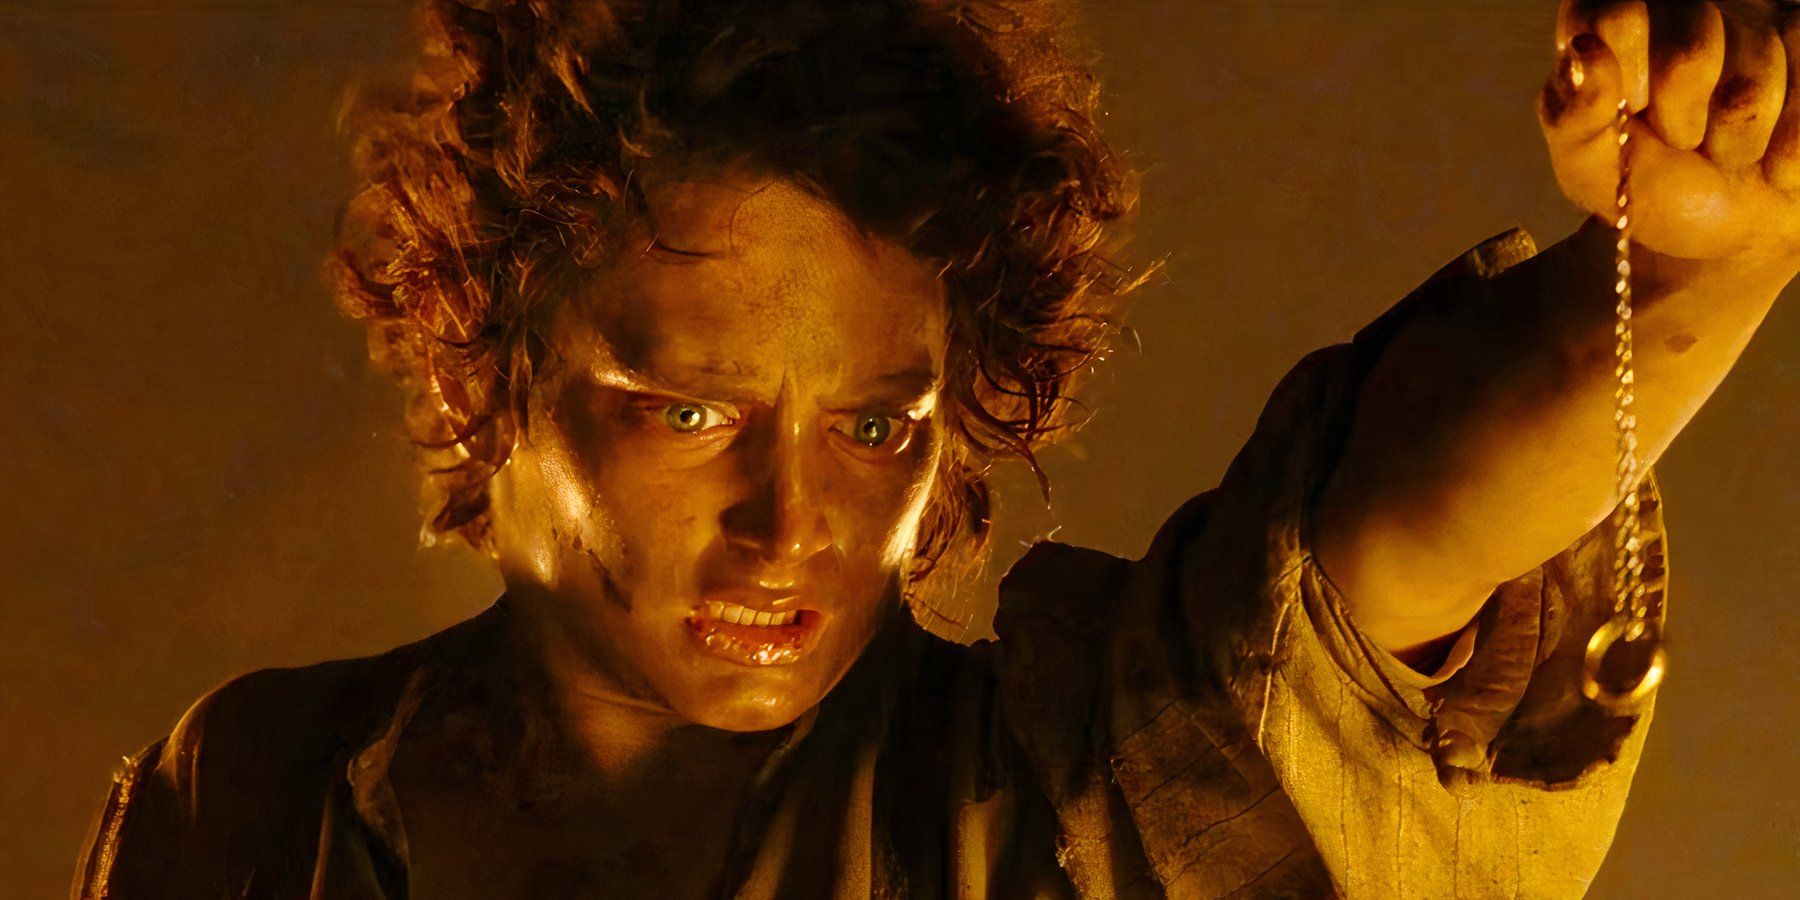 Battered and bruised, the exhausted young Hobbit Frodo Baggins, played by actor Elijah Wood, stands on the precipice of Mount Doom, preparing to cast the One Ring into the fire in The Lord of the Rings: The Return of the King.